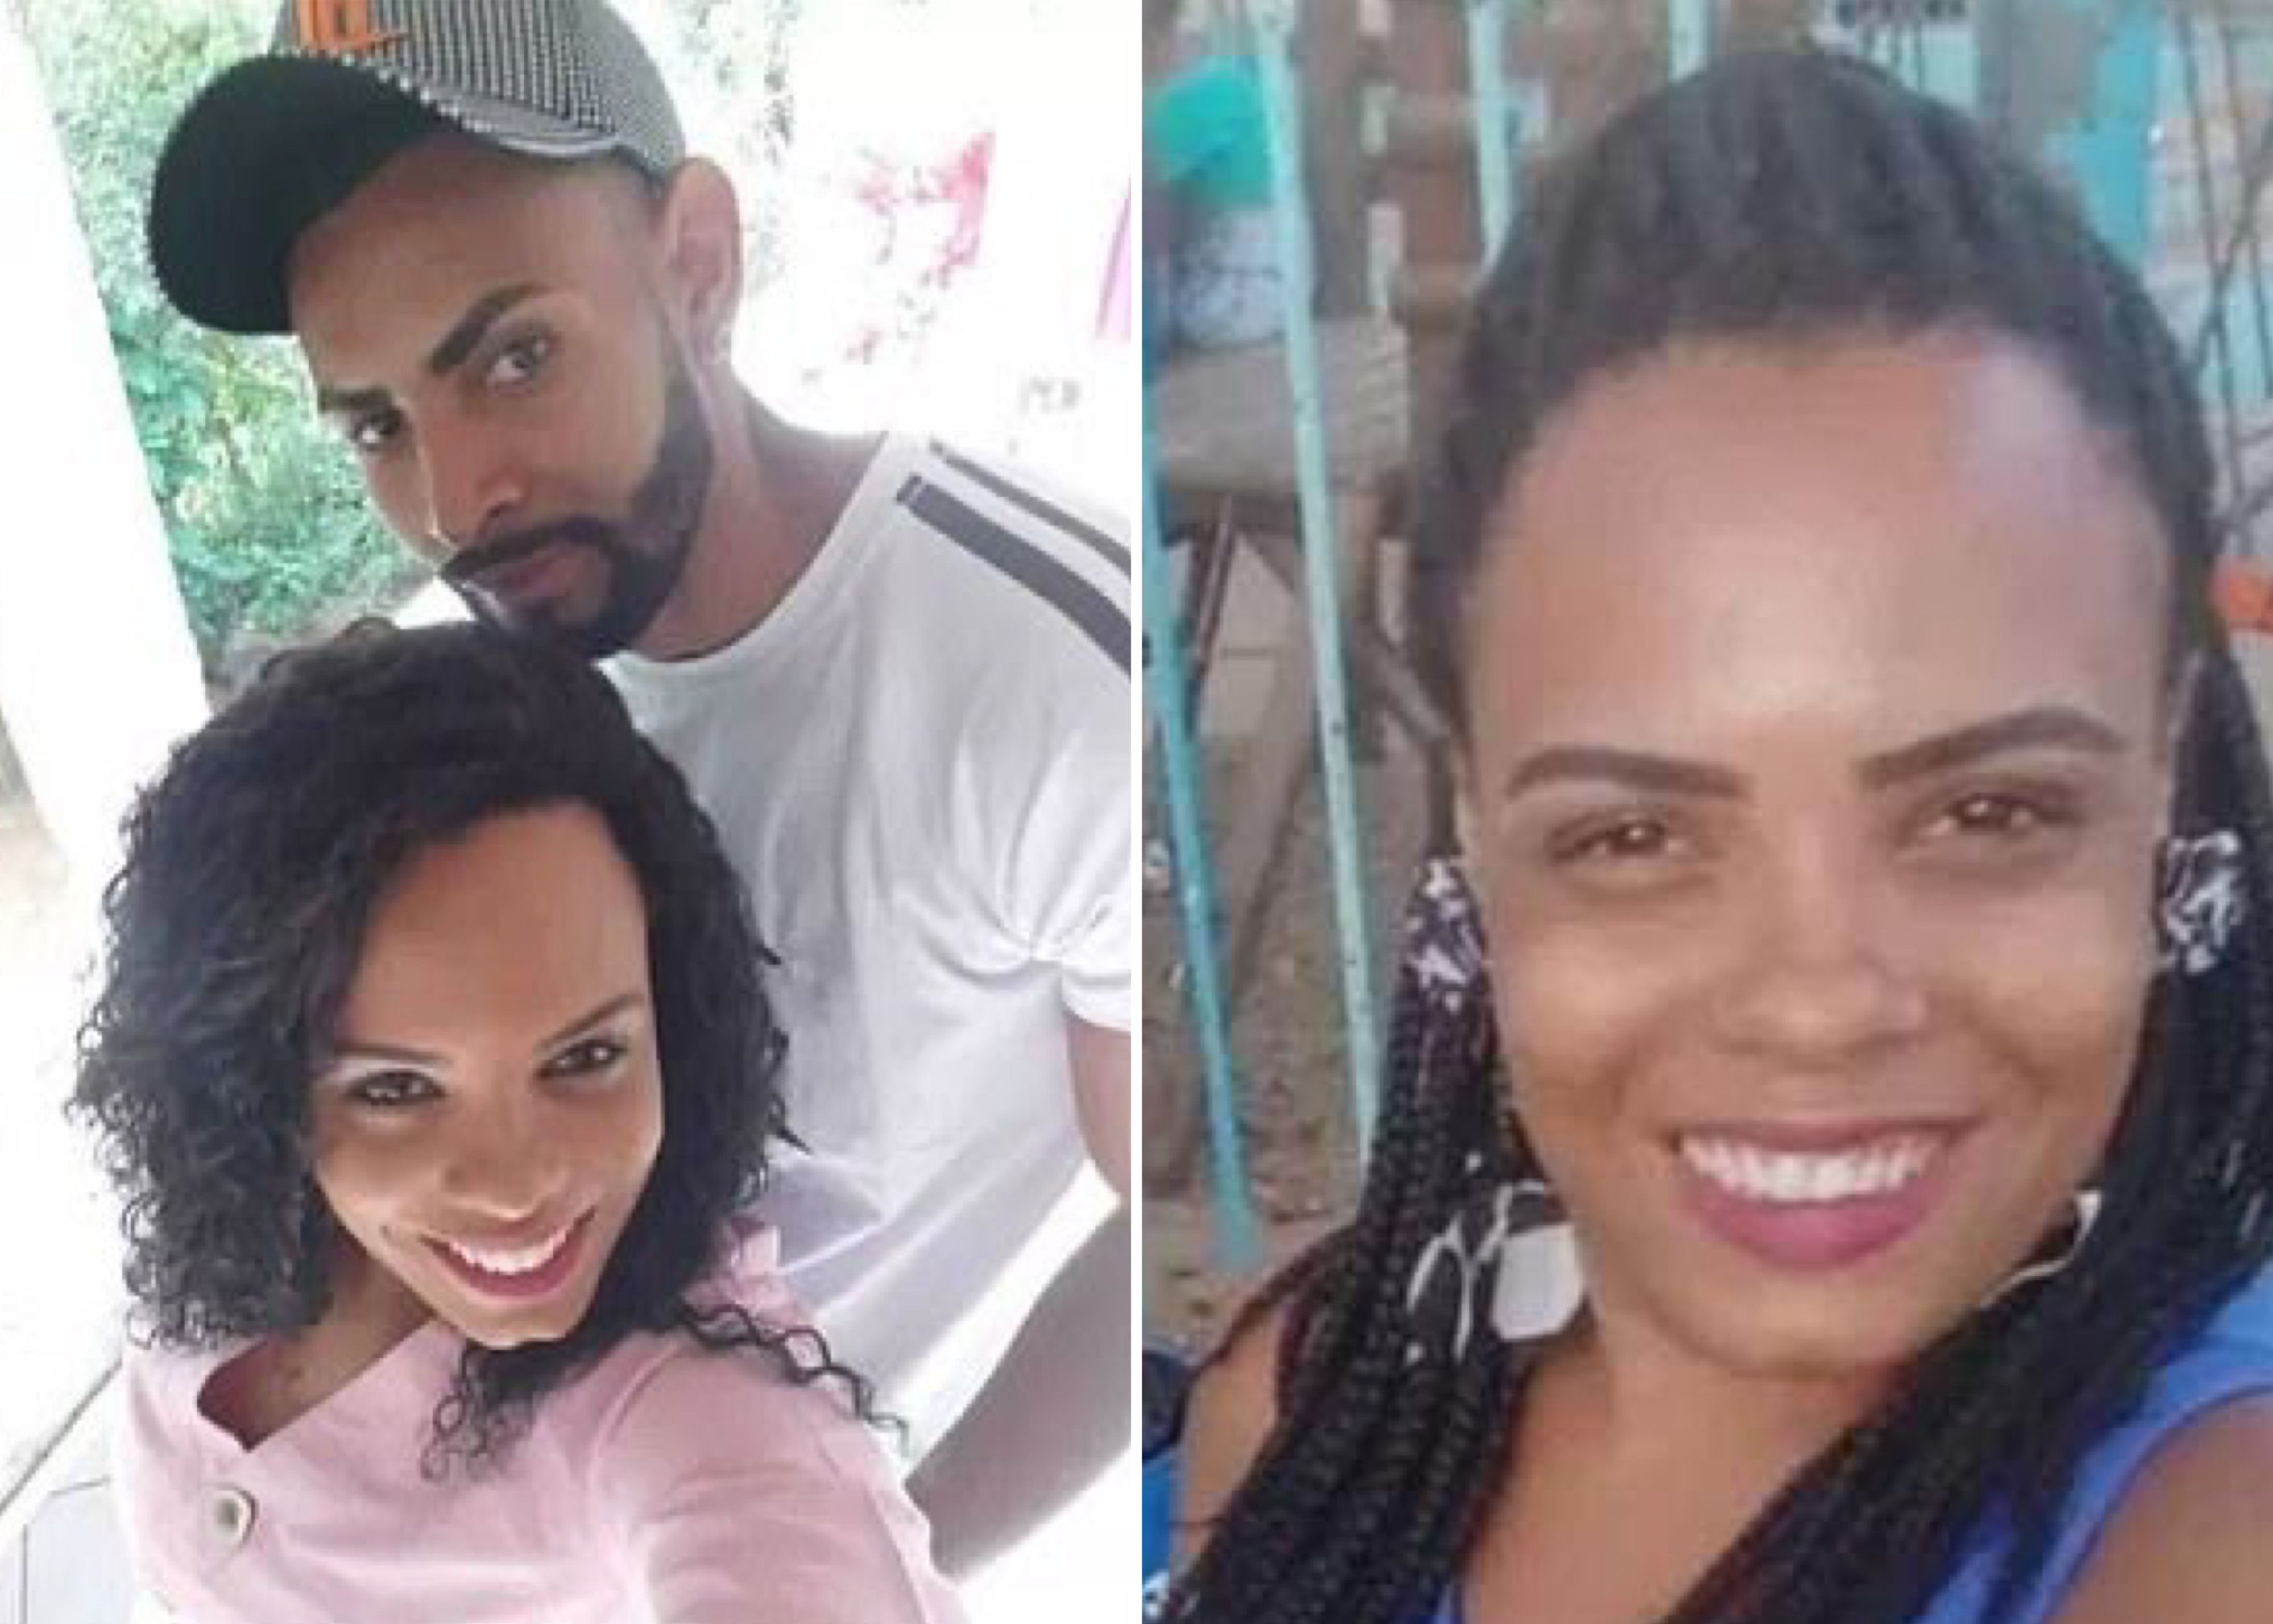 Brazilian Wife 'Cooks Husband's Penis In Frying Pan’ After Killing Him In ‘Self-Defence’ During Argument